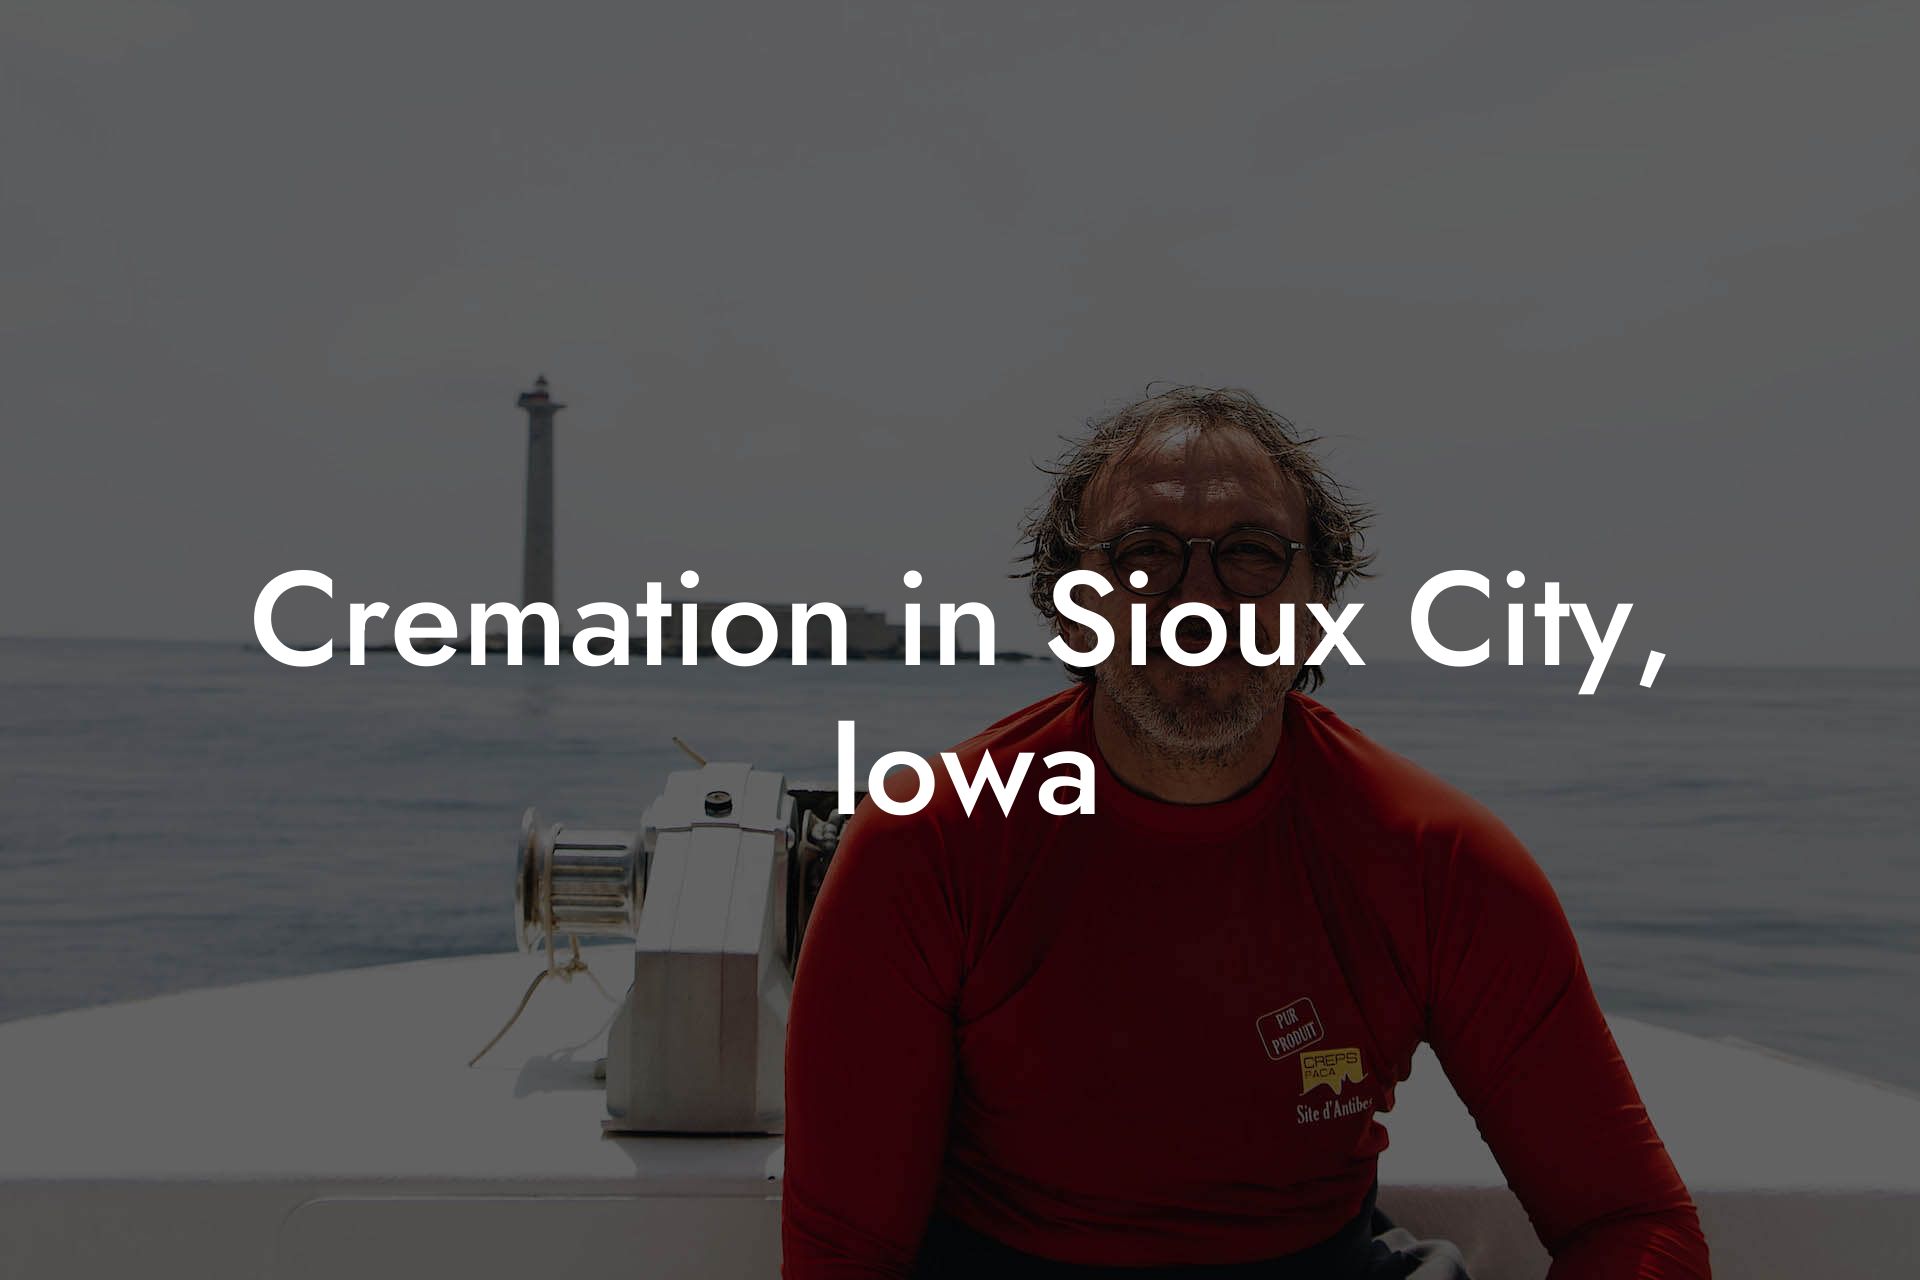 Cremation in Sioux City, Iowa